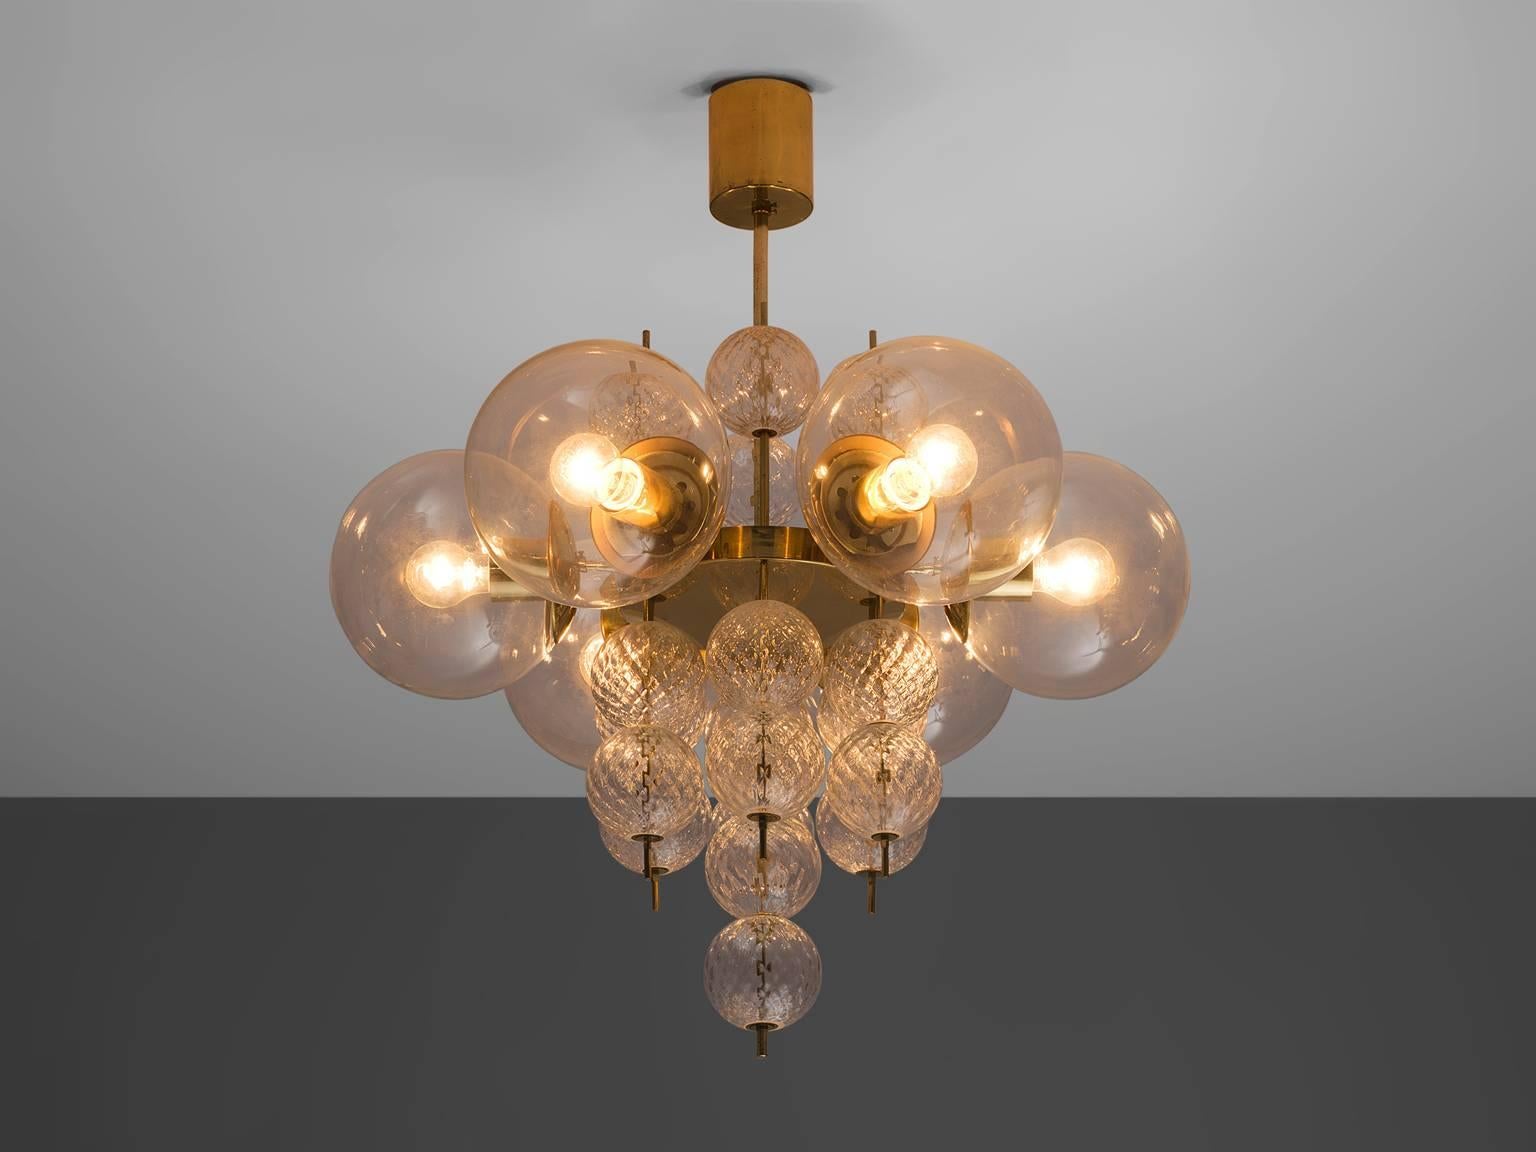 Chandelier, brass and glass bulbs, Austria, 1960s.

This chandelier features a brass fixture and art-glass. The chandelier with brass frame consist of six lights, formed in a circle, with glass shades. The pleasant light it spreads is very